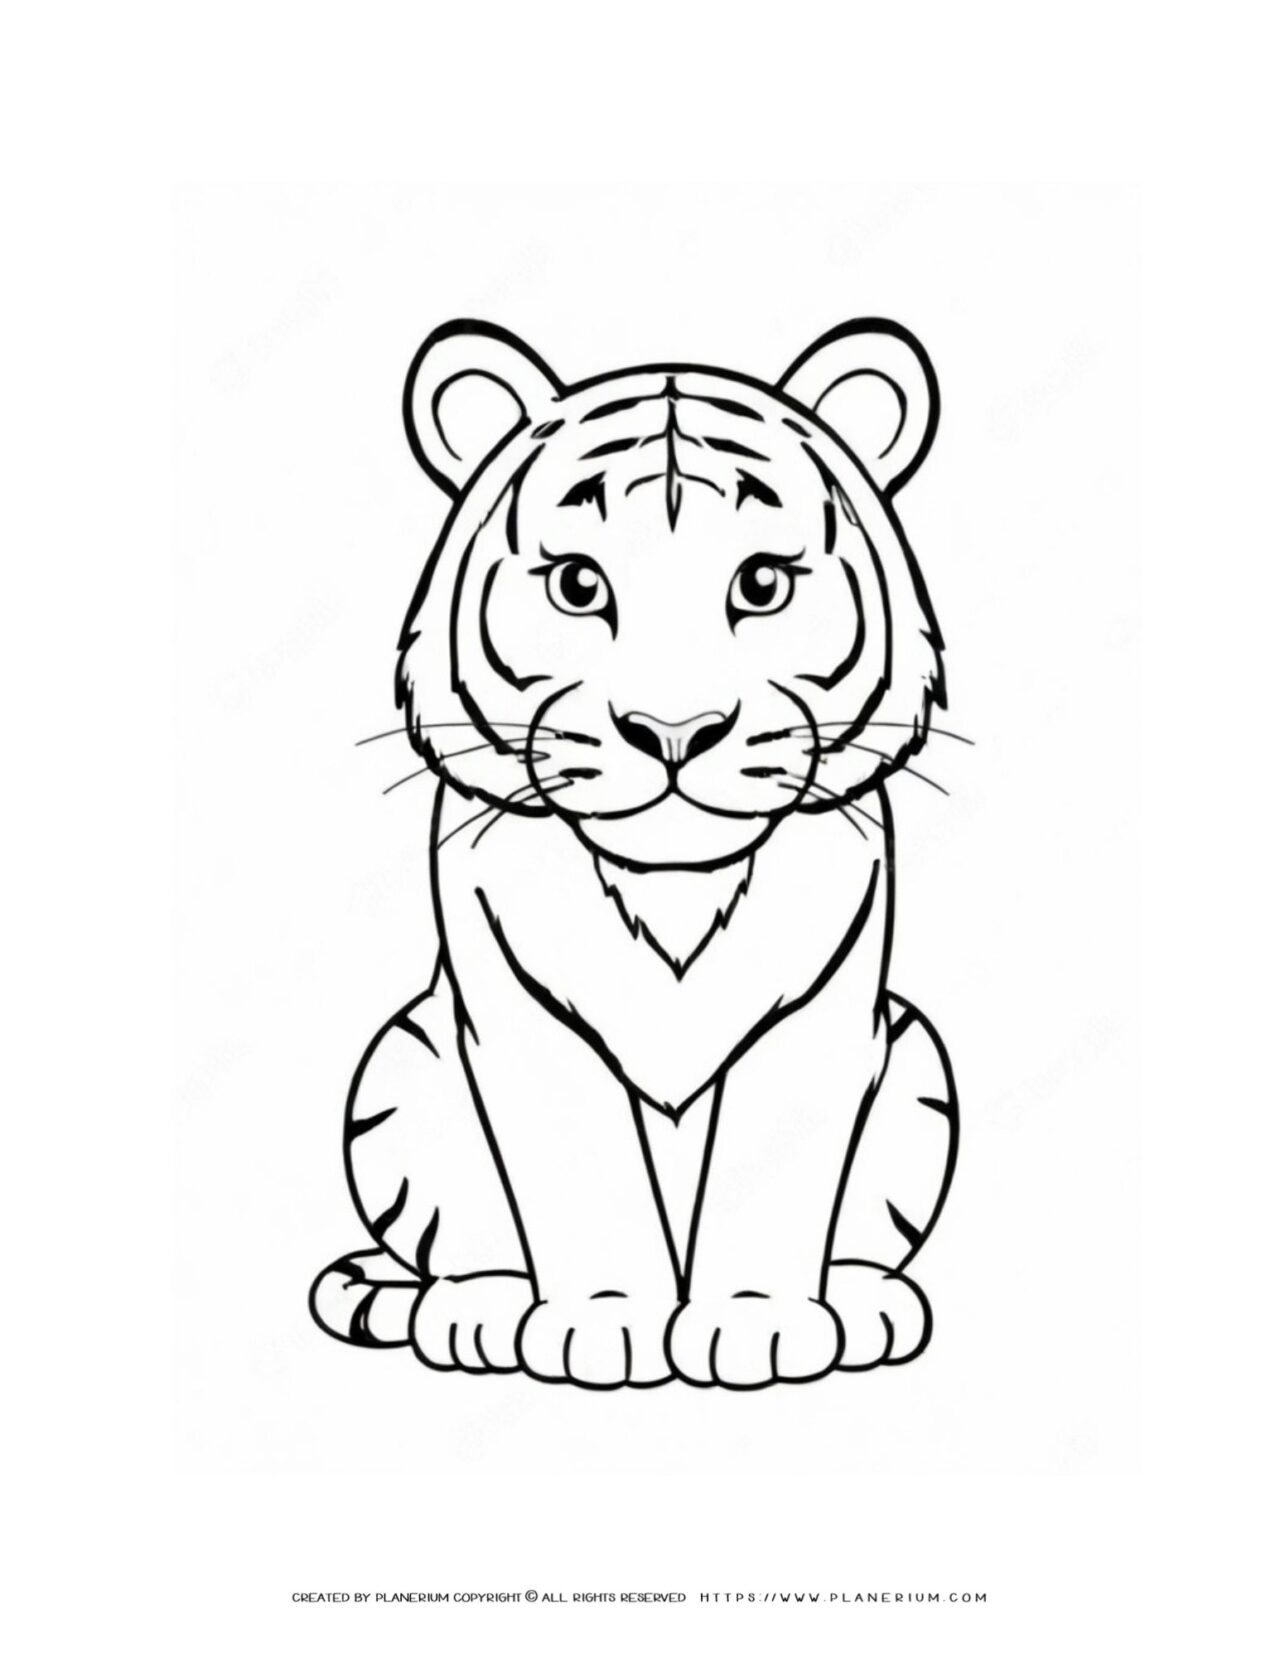 Cute-Baby-Tiger-Outline-Cartoon-Style-Coloring-Page-for-Kids